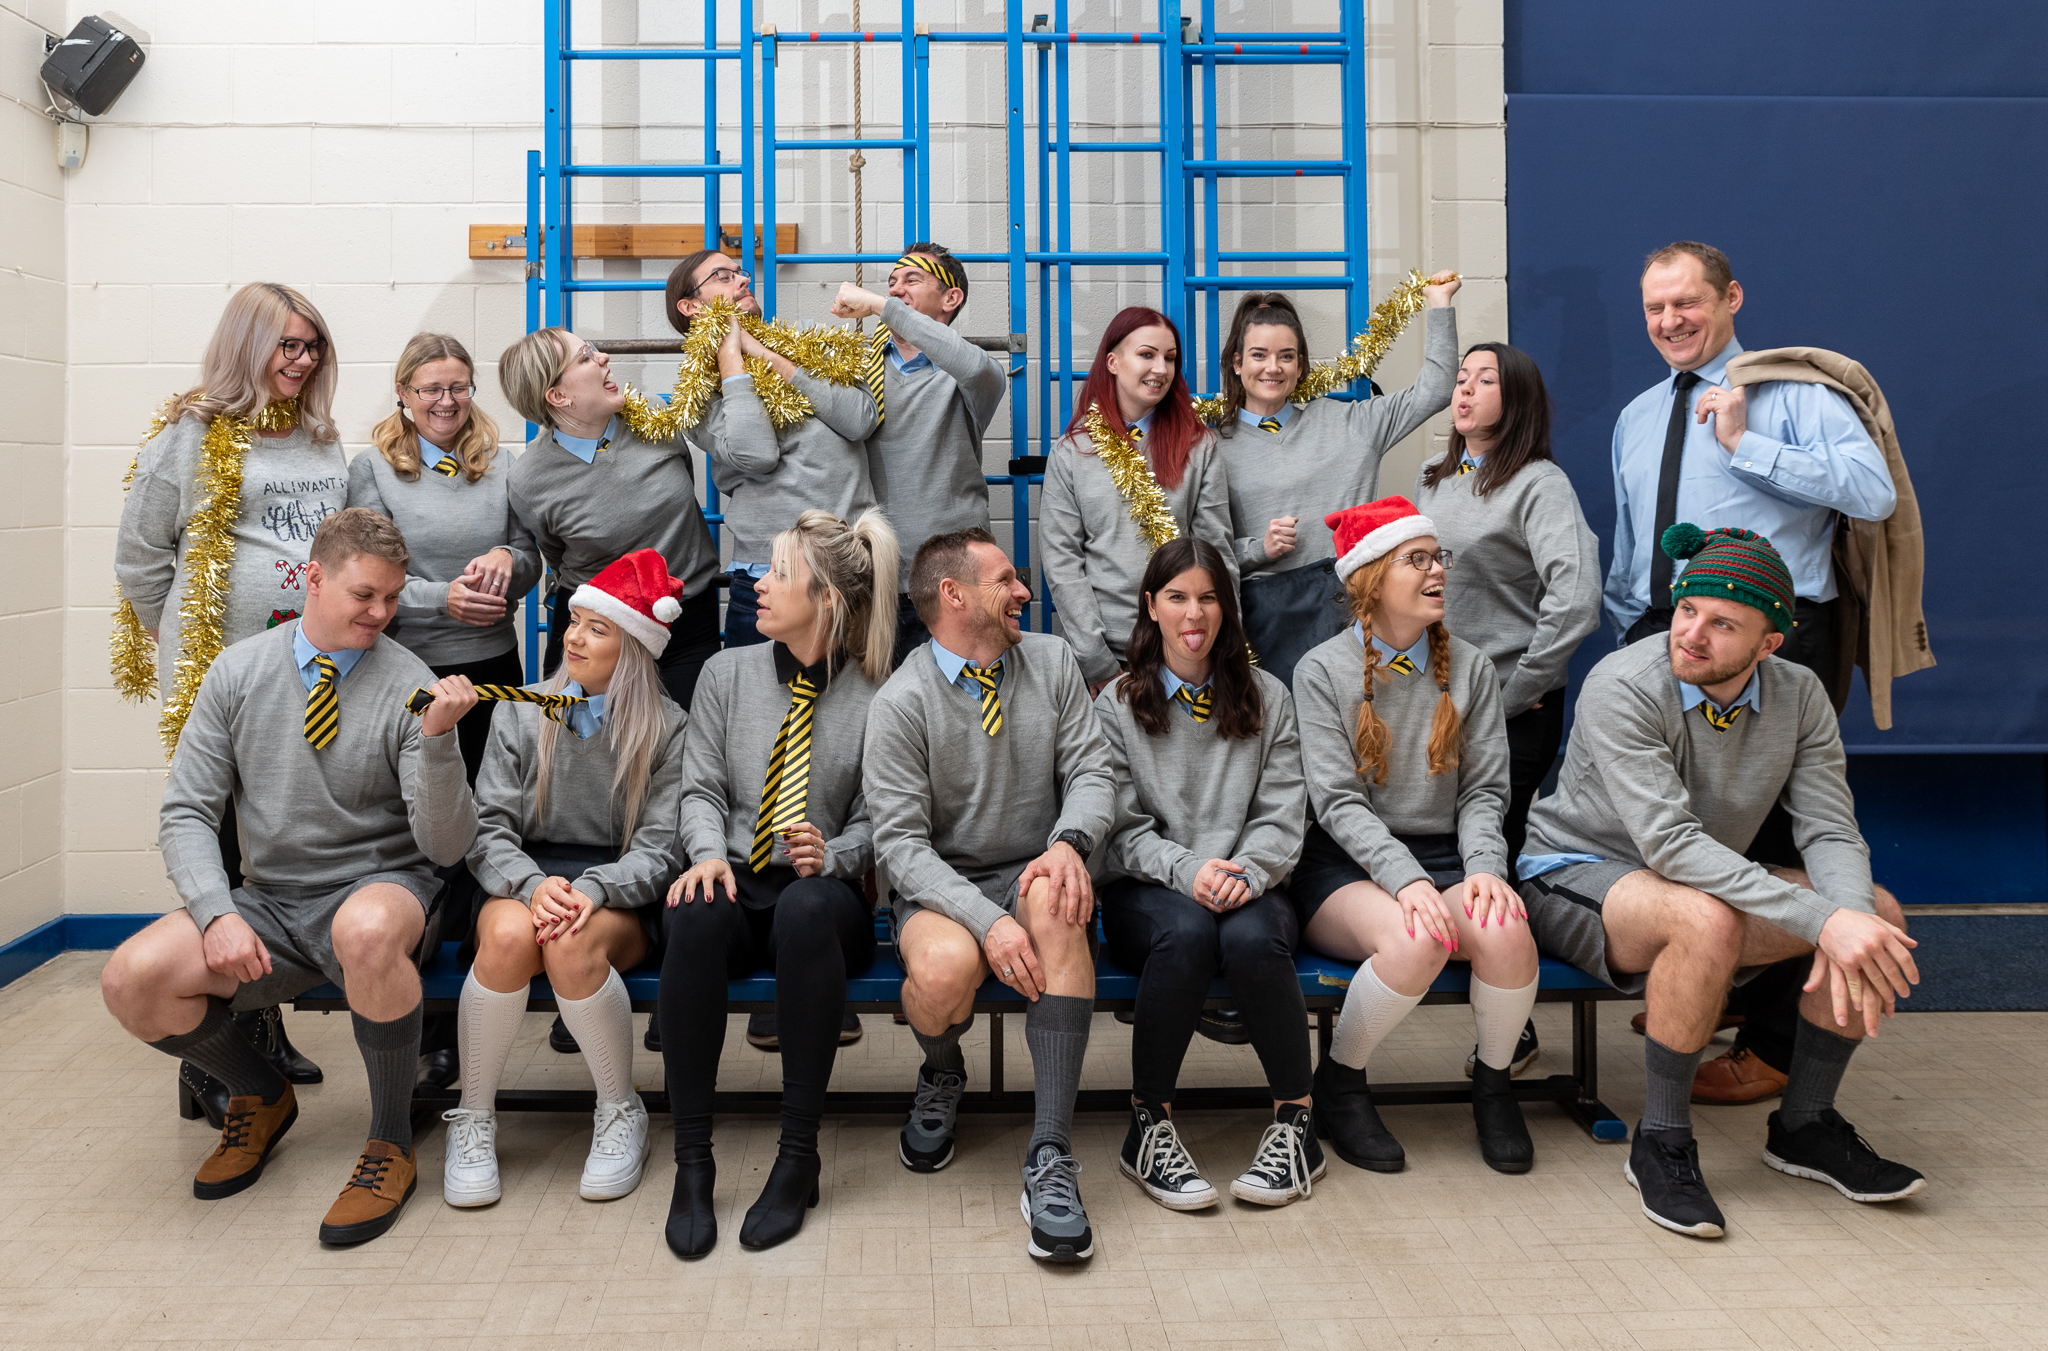 The Staff of We Are Boutique Dressed up as School Children for their 2018 Christmas Card